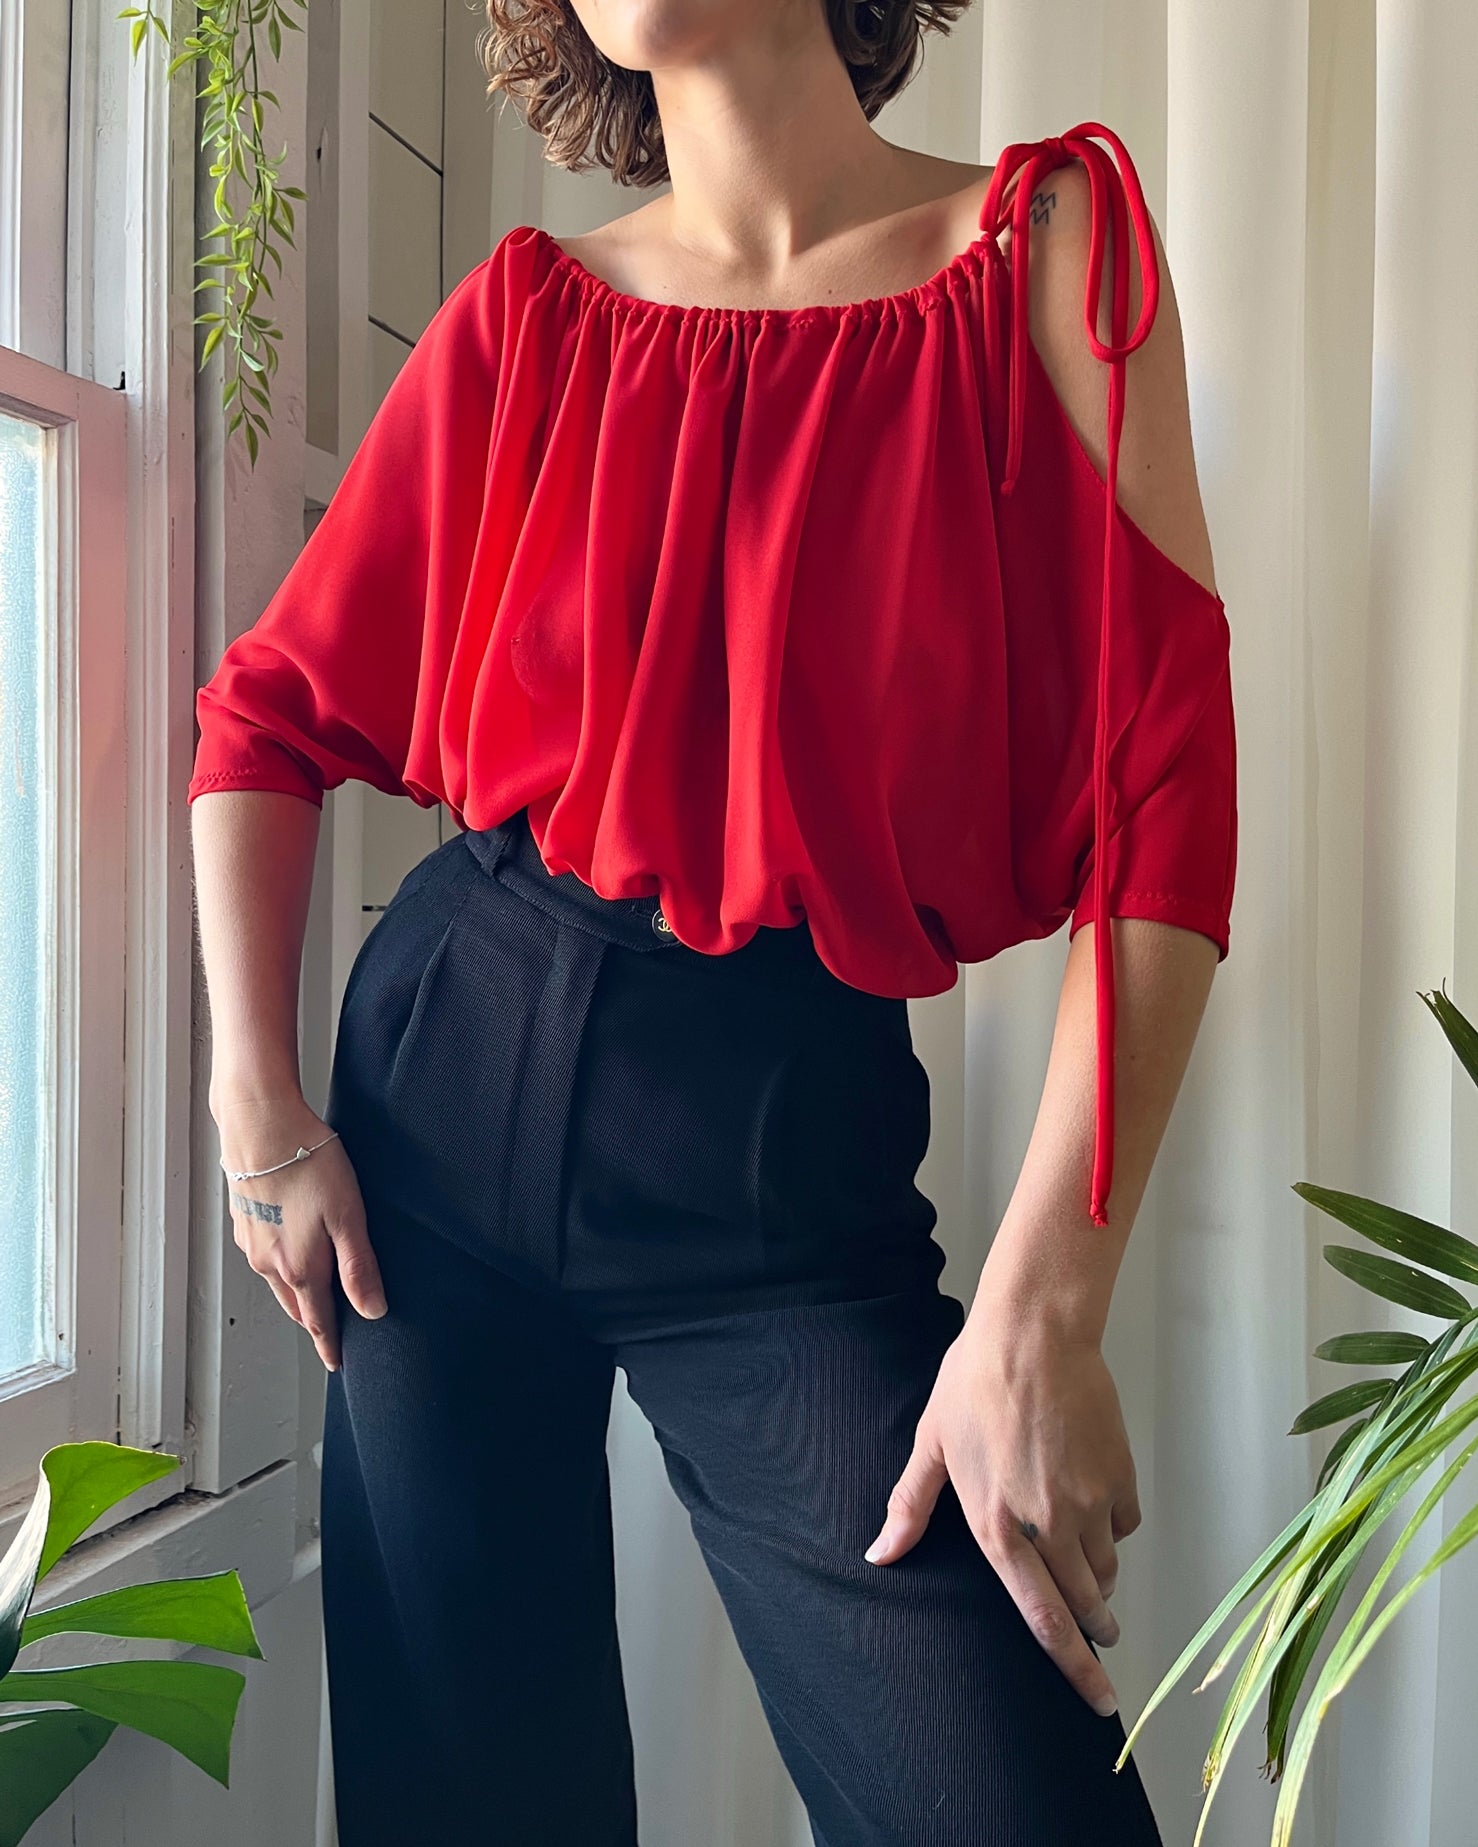 Cold-Shoulder Tops Are Making a Comeback - theFashionSpot